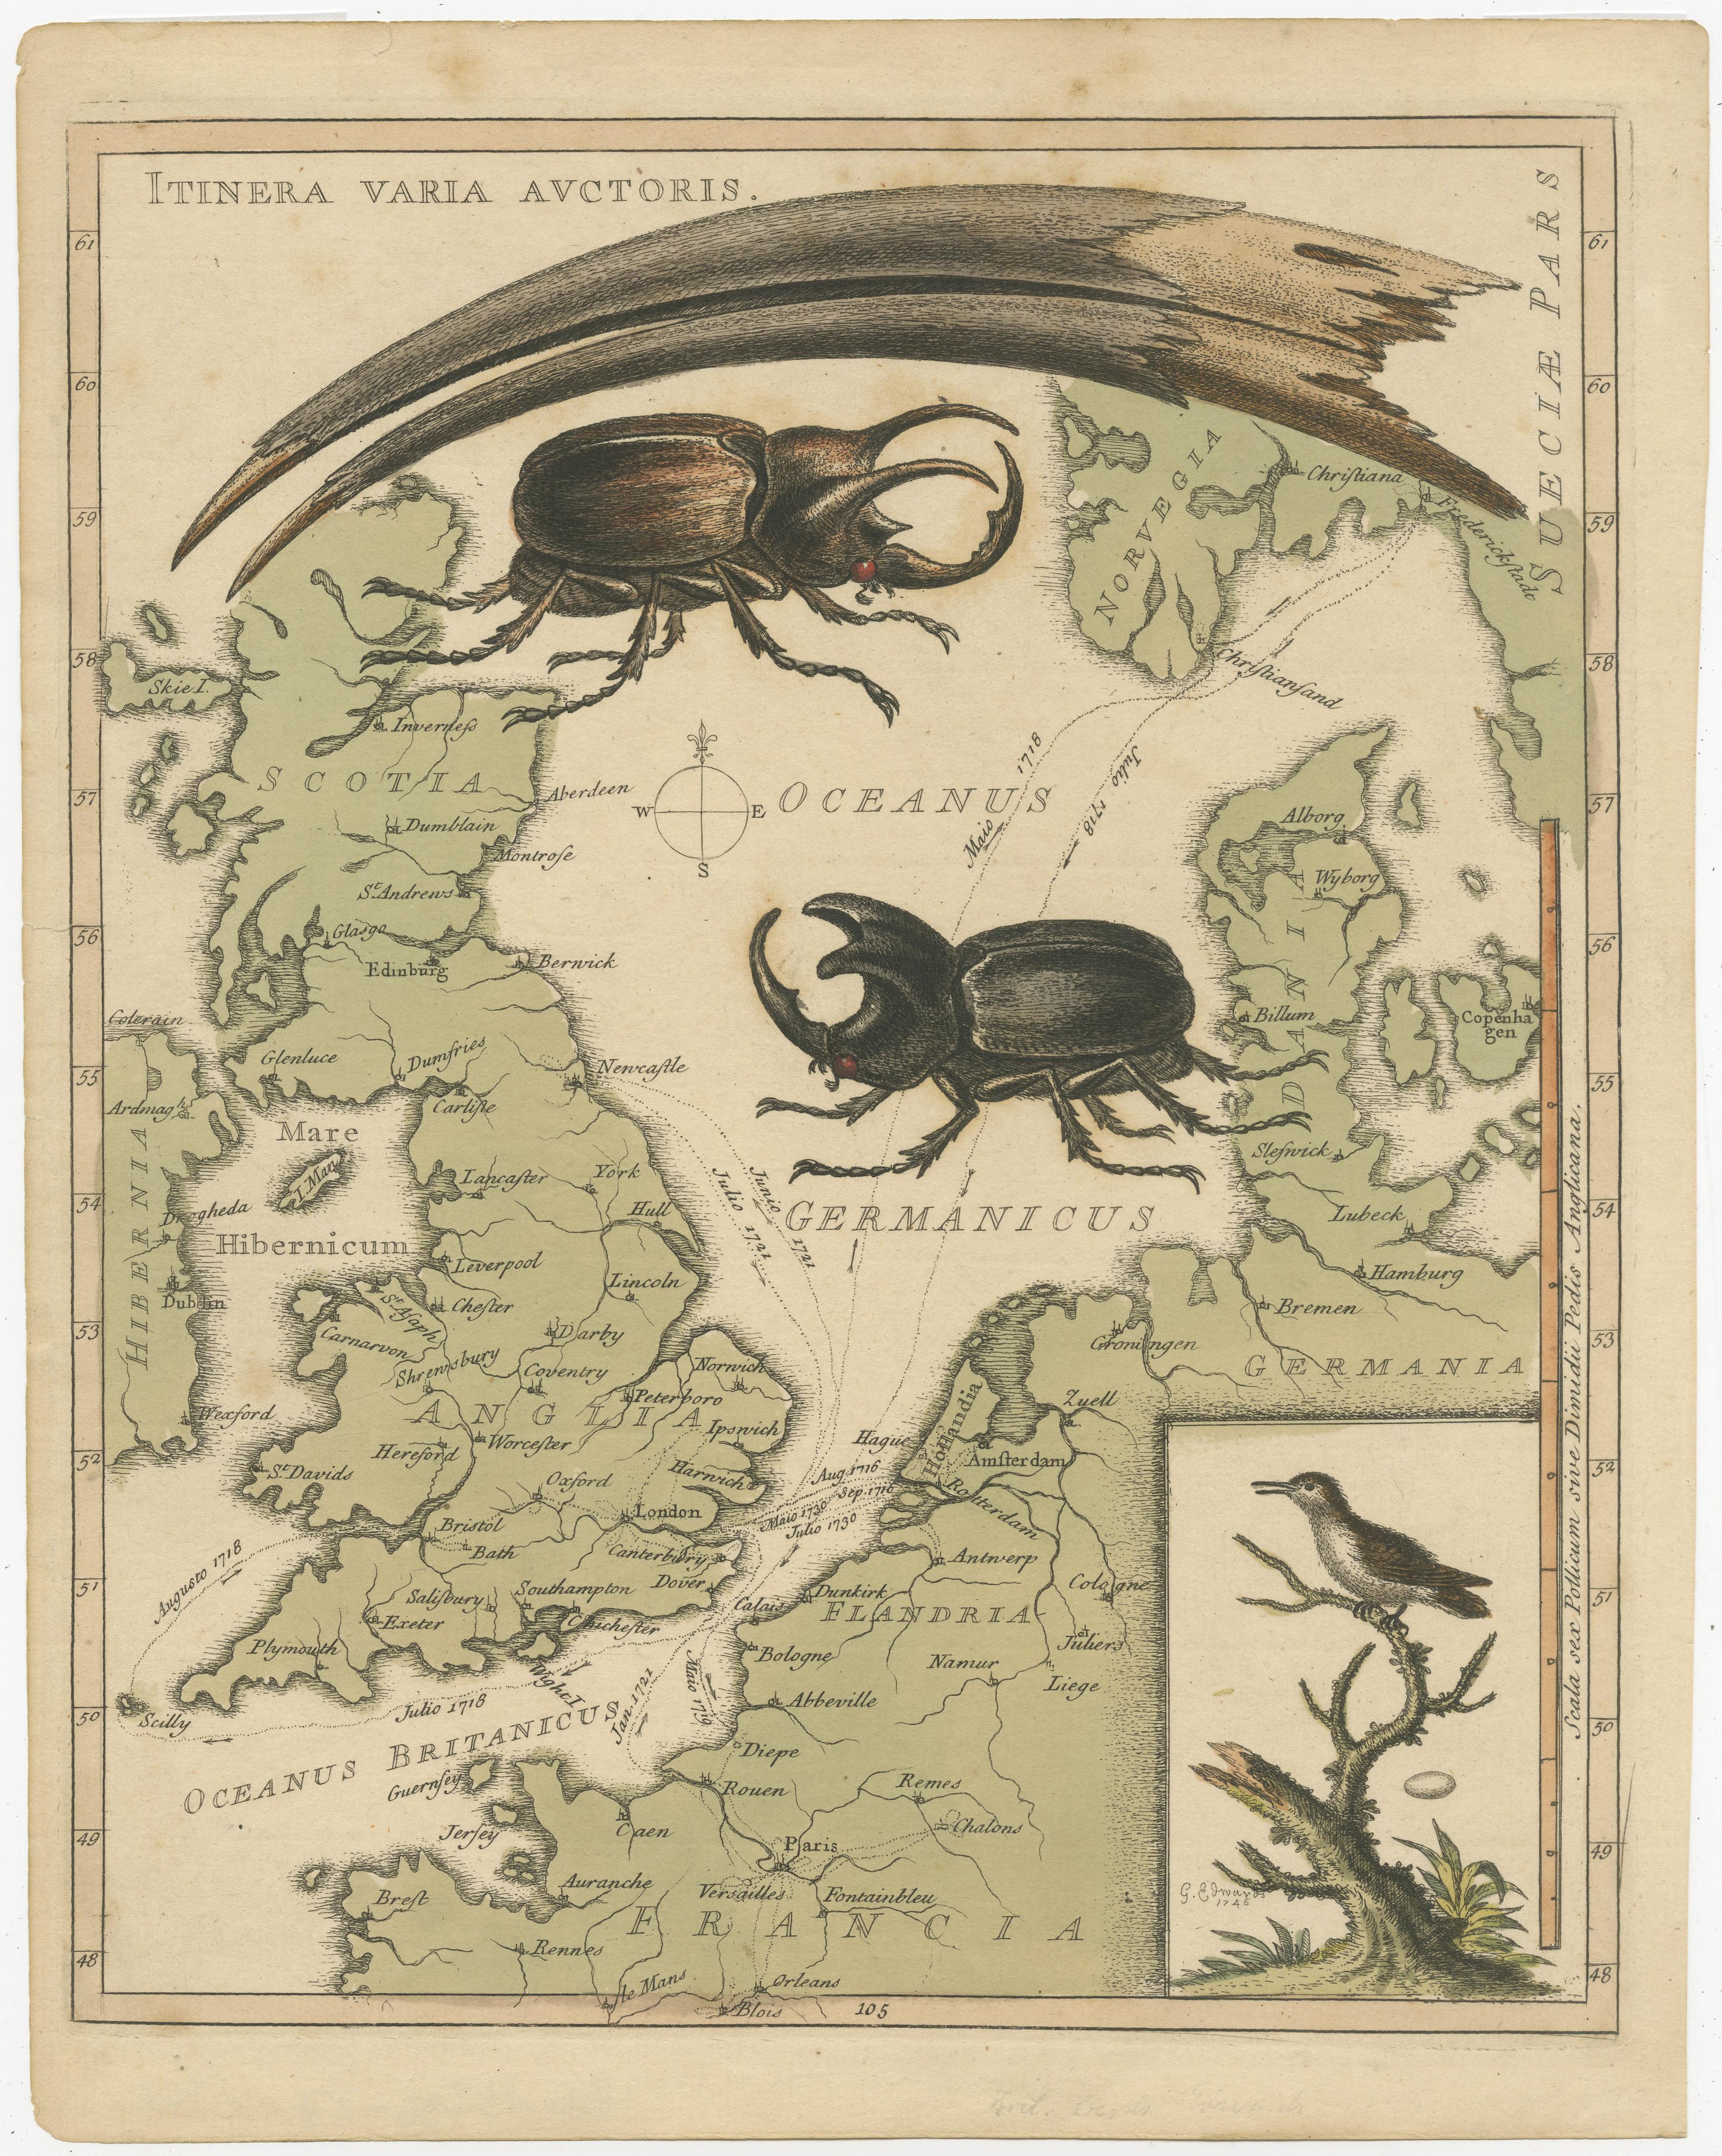 Antique map titled 'Itinera Varia Auctoris'. Very interesting map of Great Britain and Northern Europe. The map shows Edwards' journeys between 1716-1730 to study his beloved birds and other natural creatures, including Holland in 1716 and again in